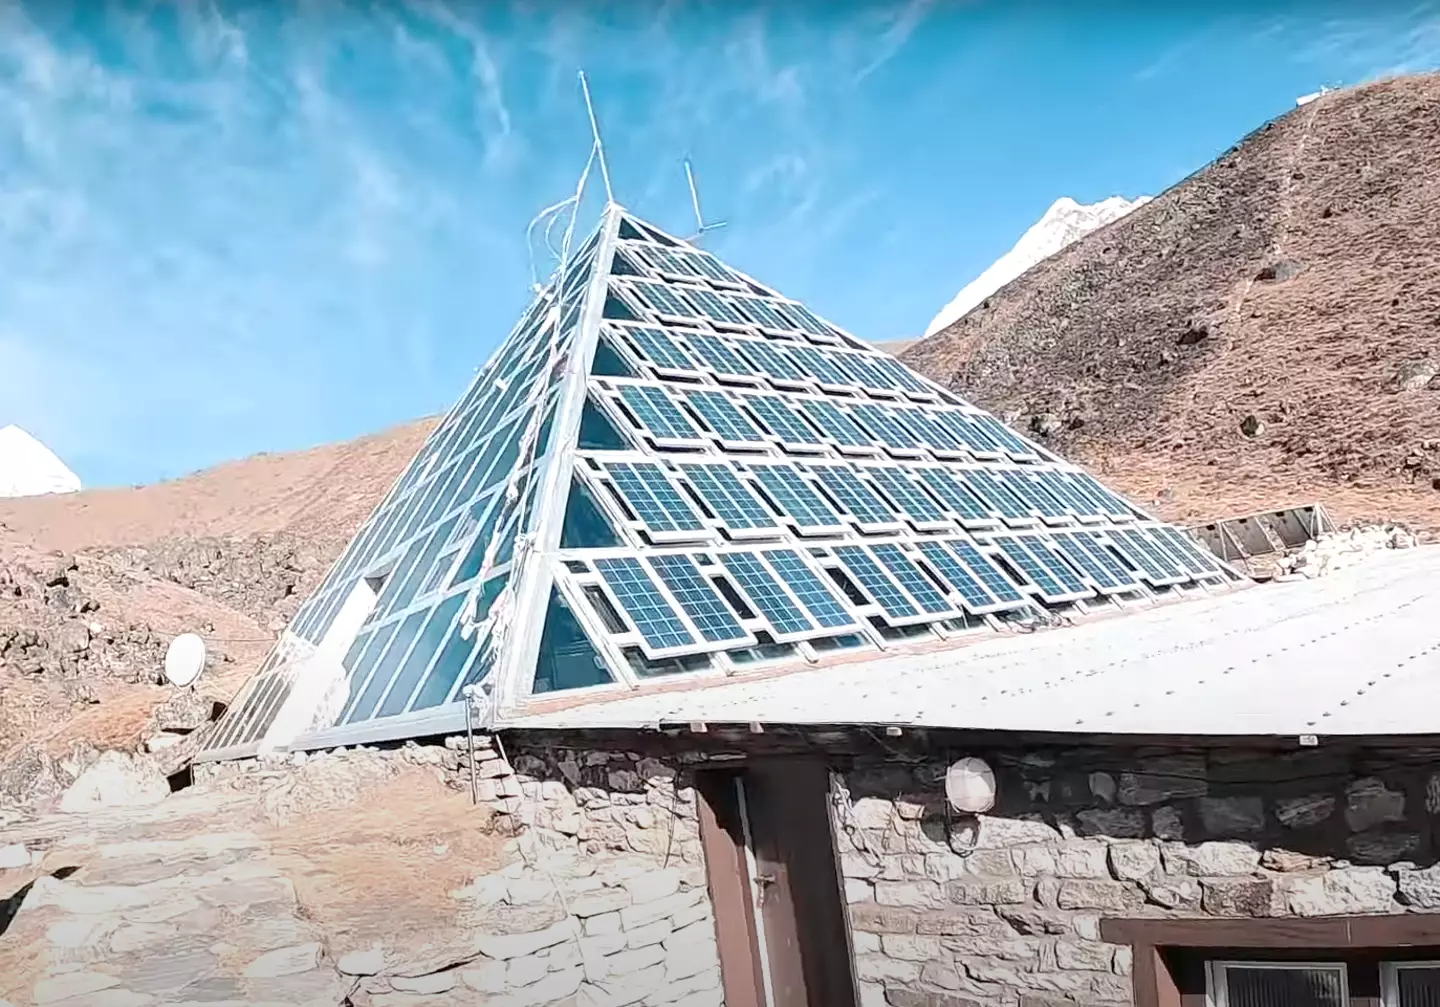 16,000ft up Mount Everest lies the world's scariest lab that's very close to being abandoned.